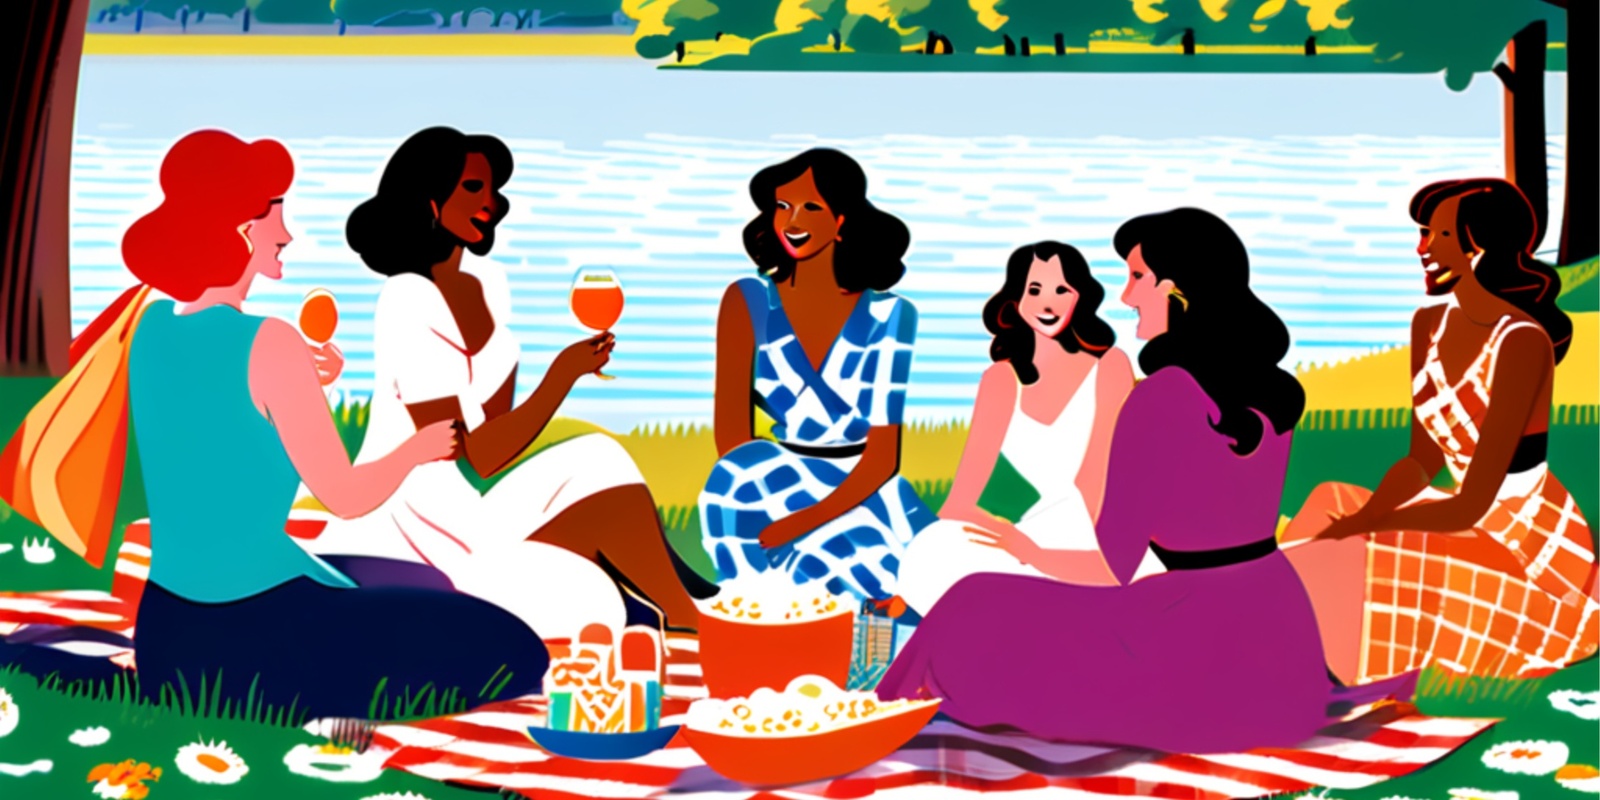 Banner image for Prosperity & Prosecco - A Picnic in the Park | Beyond Besties x By Prowl 